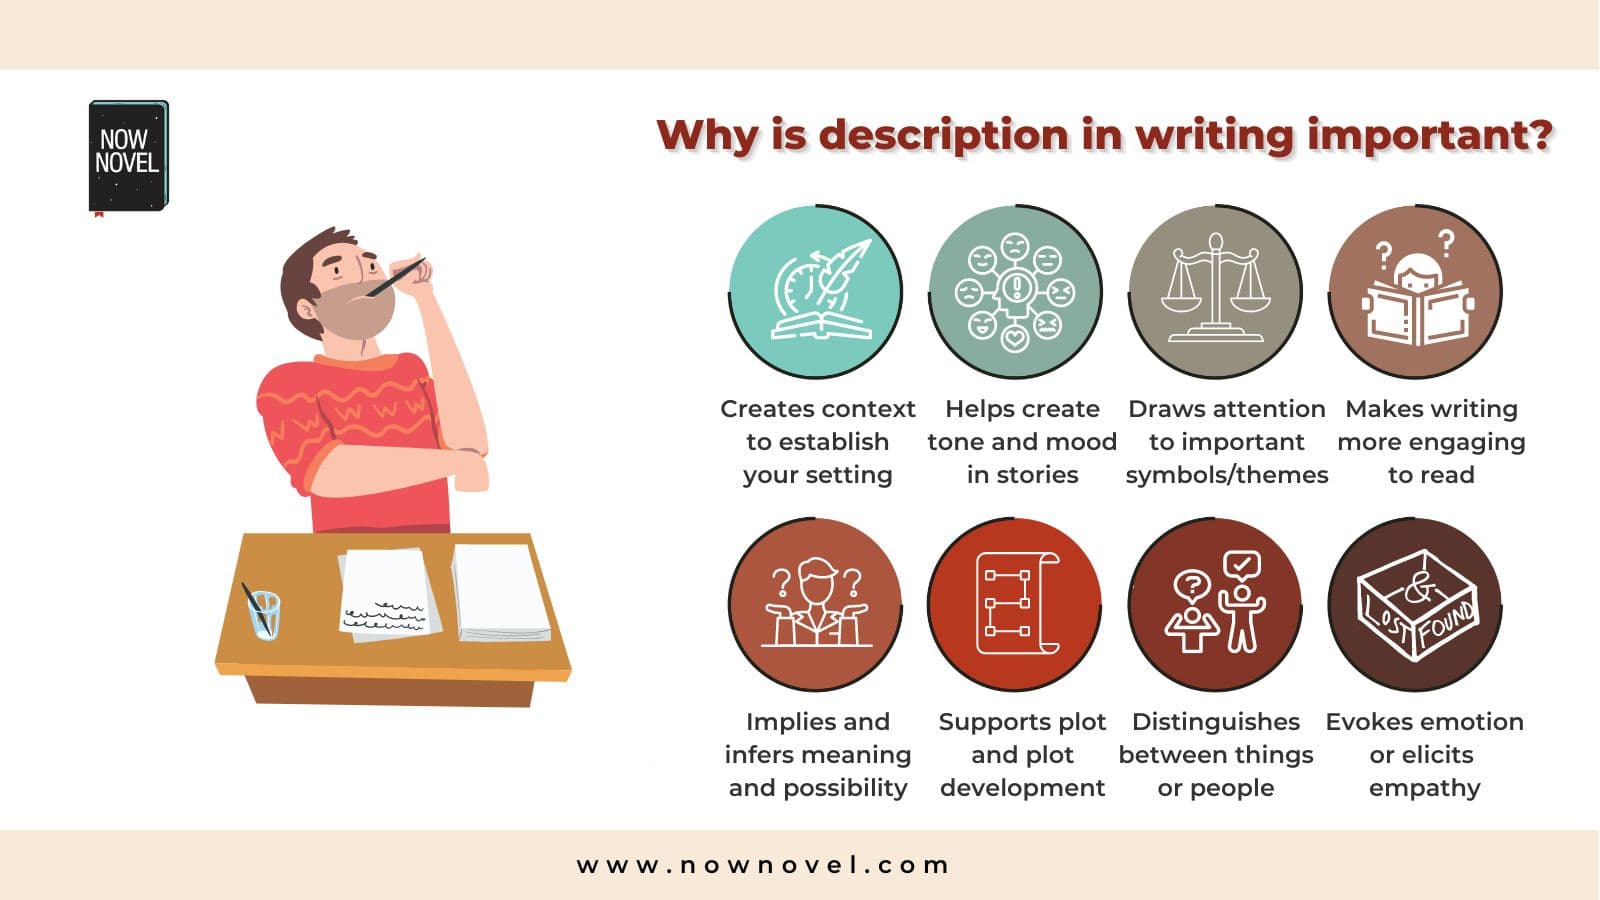 Why is description in writing important infographic